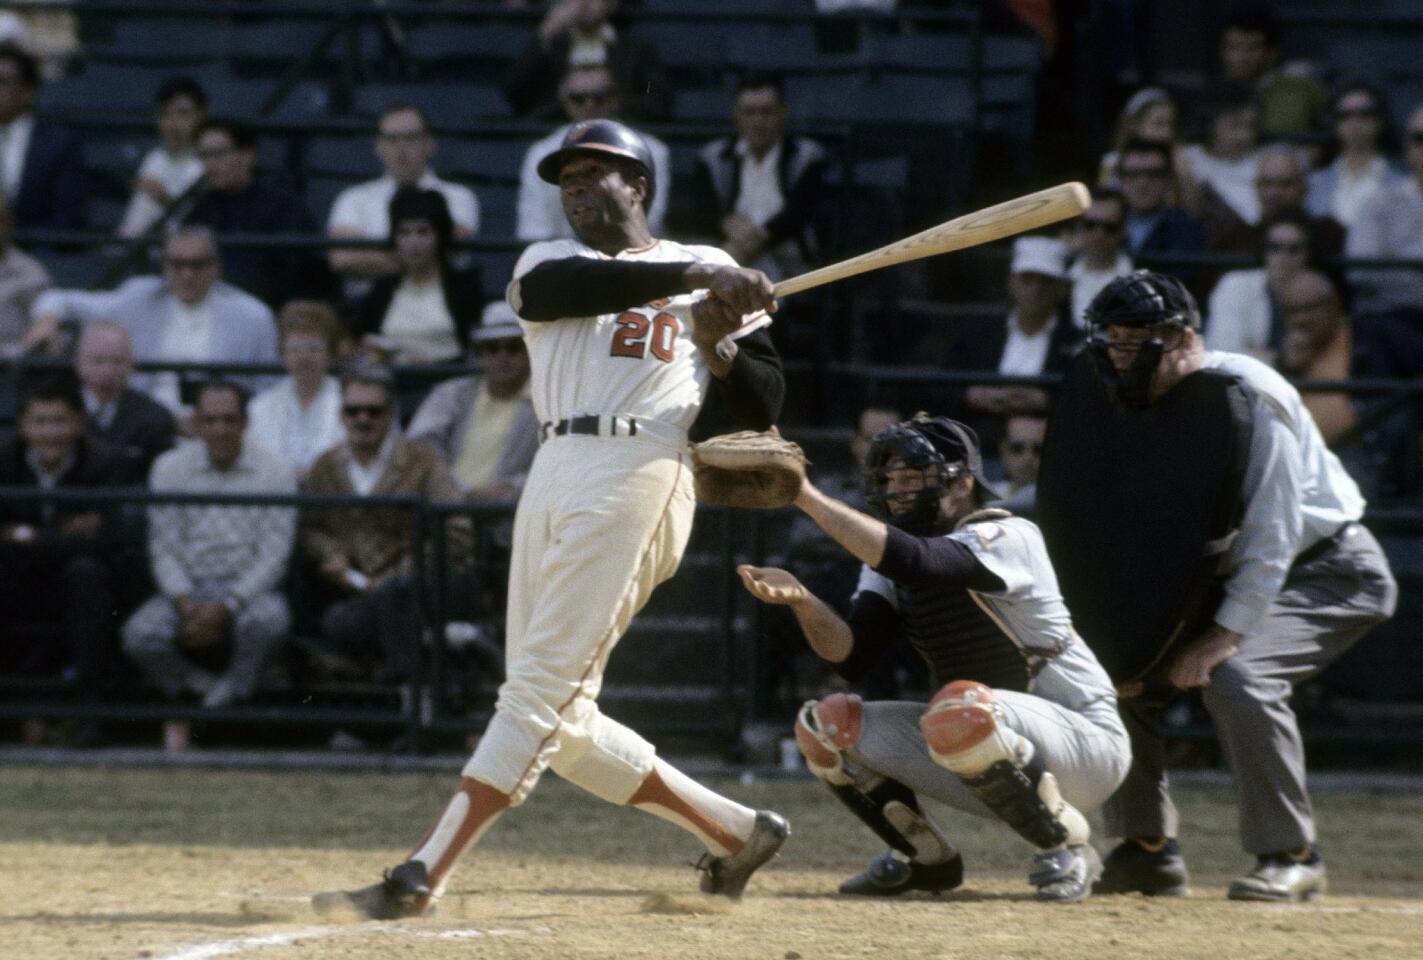 Baltimore Orioles' Frank Robinson watches the flight of his ball during a game at Memorial Stadium in Baltimore, Maryland.